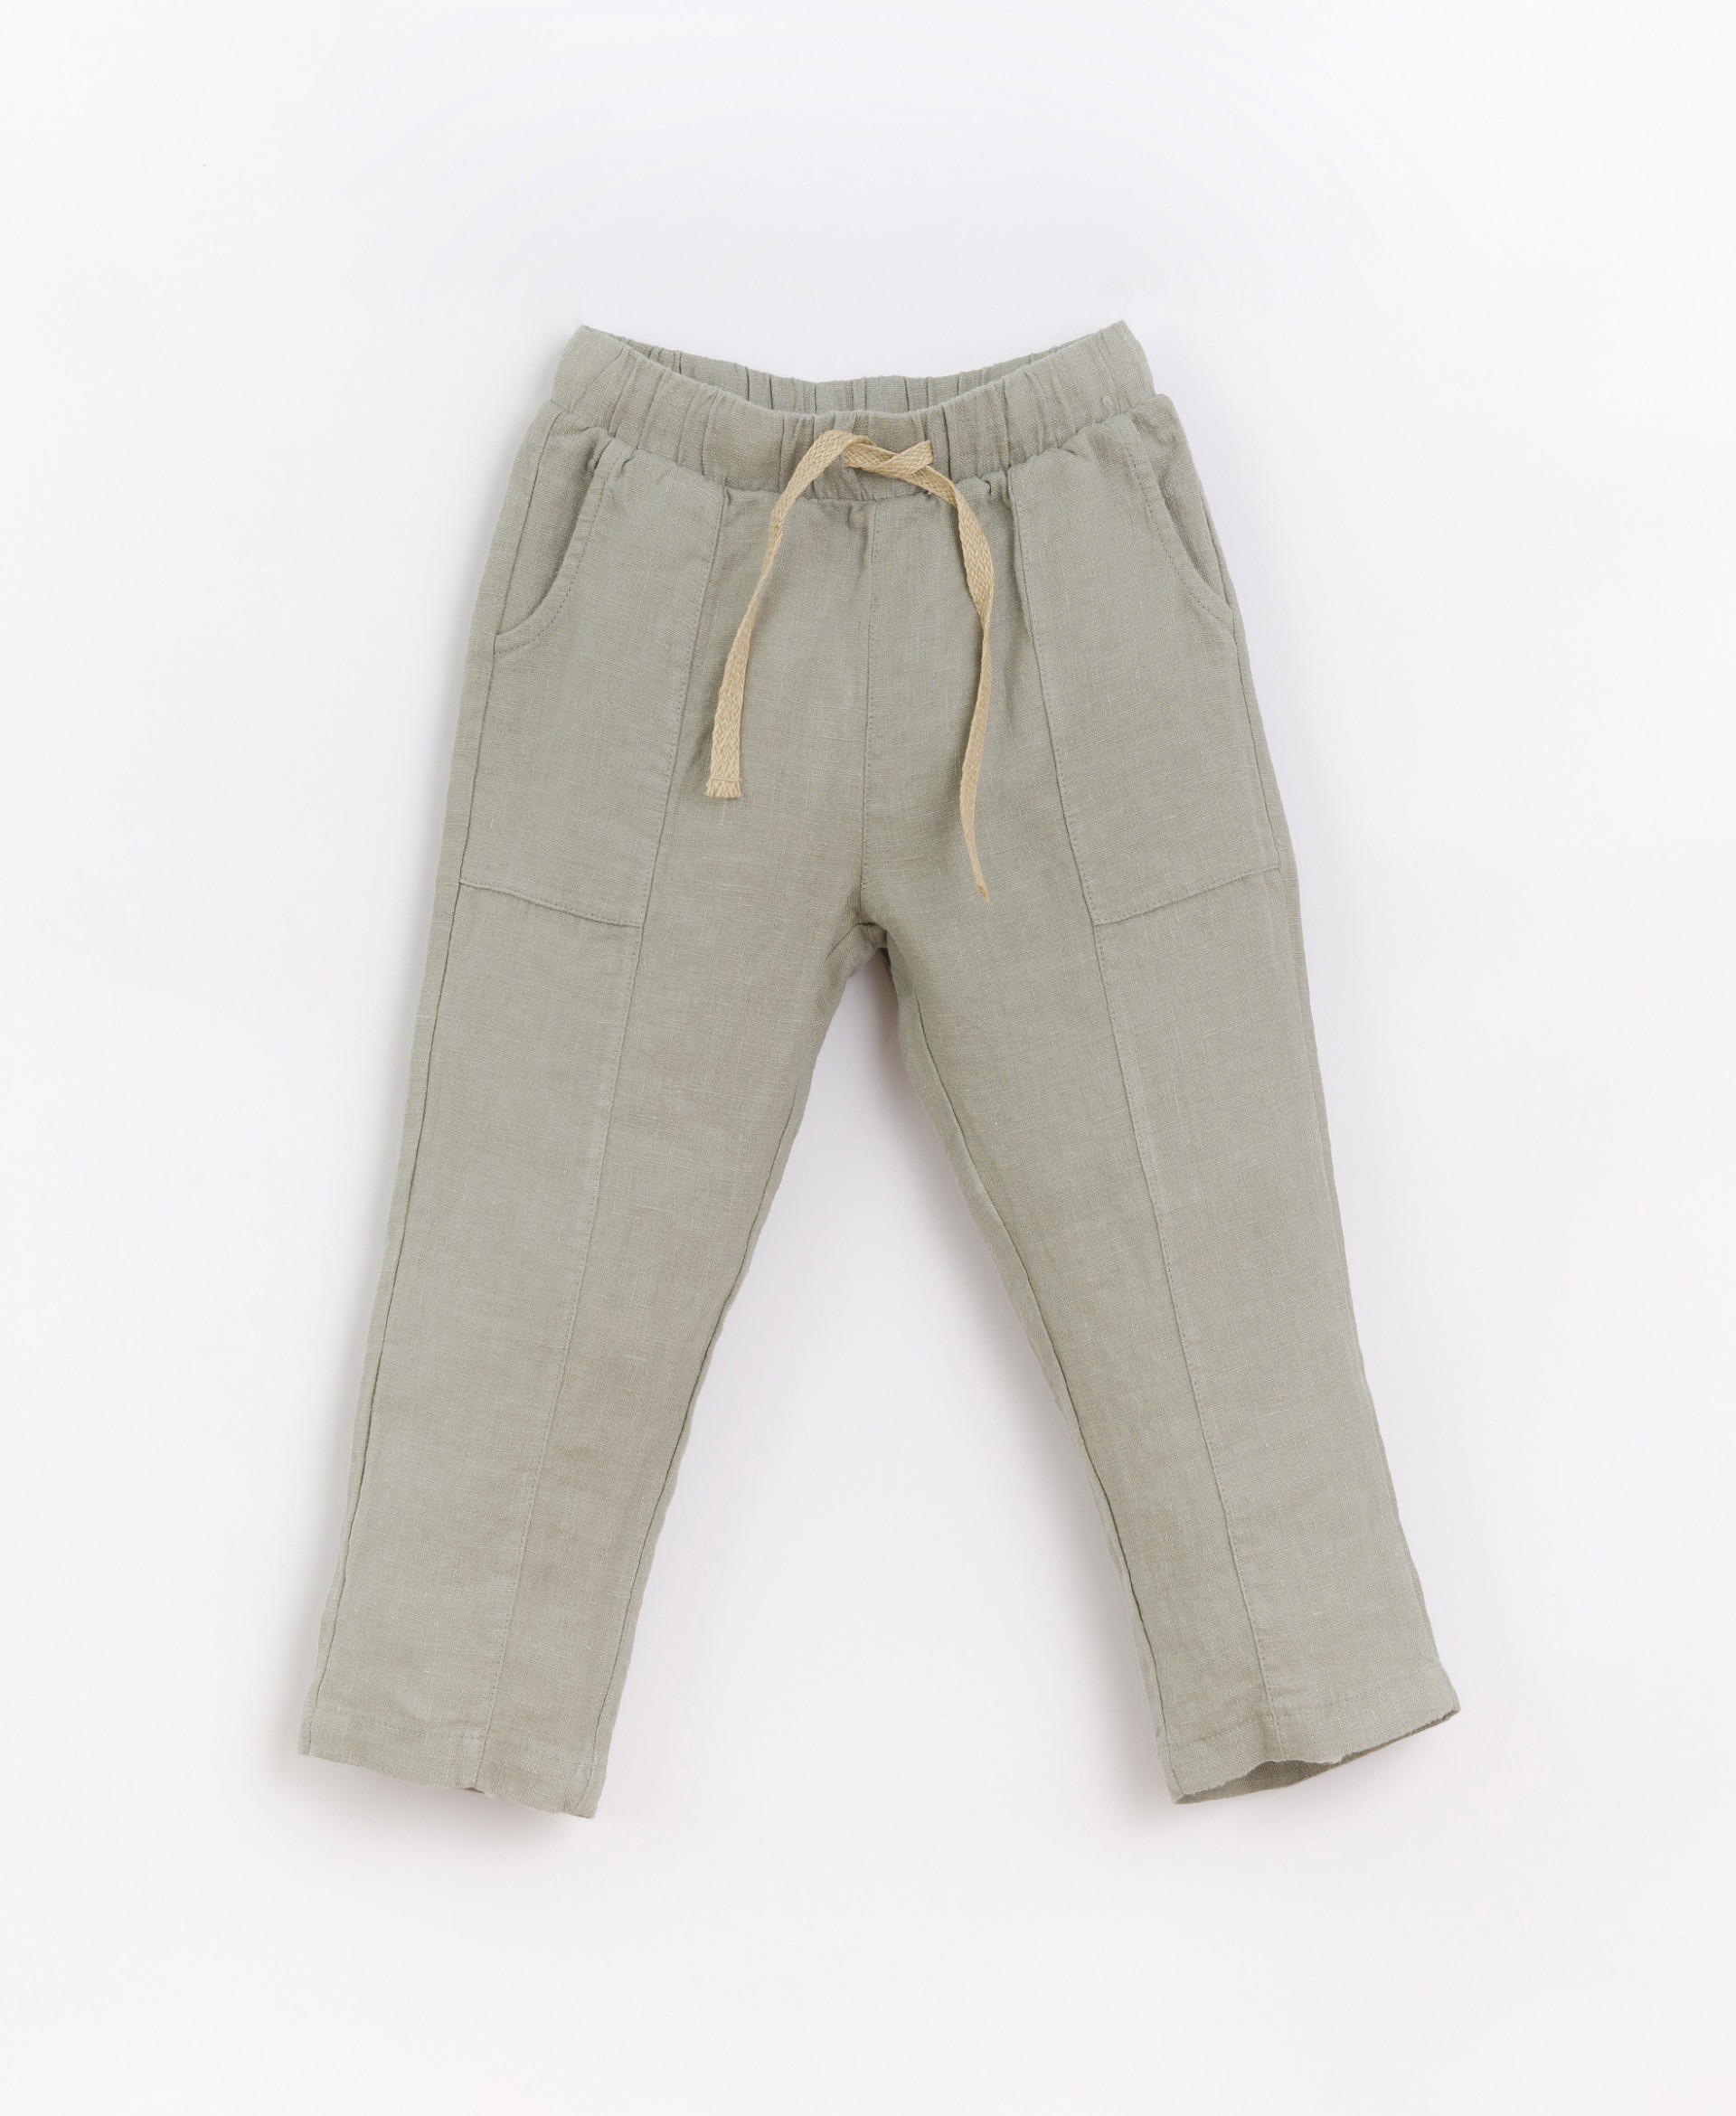 Pants in linen fabric | Basketry